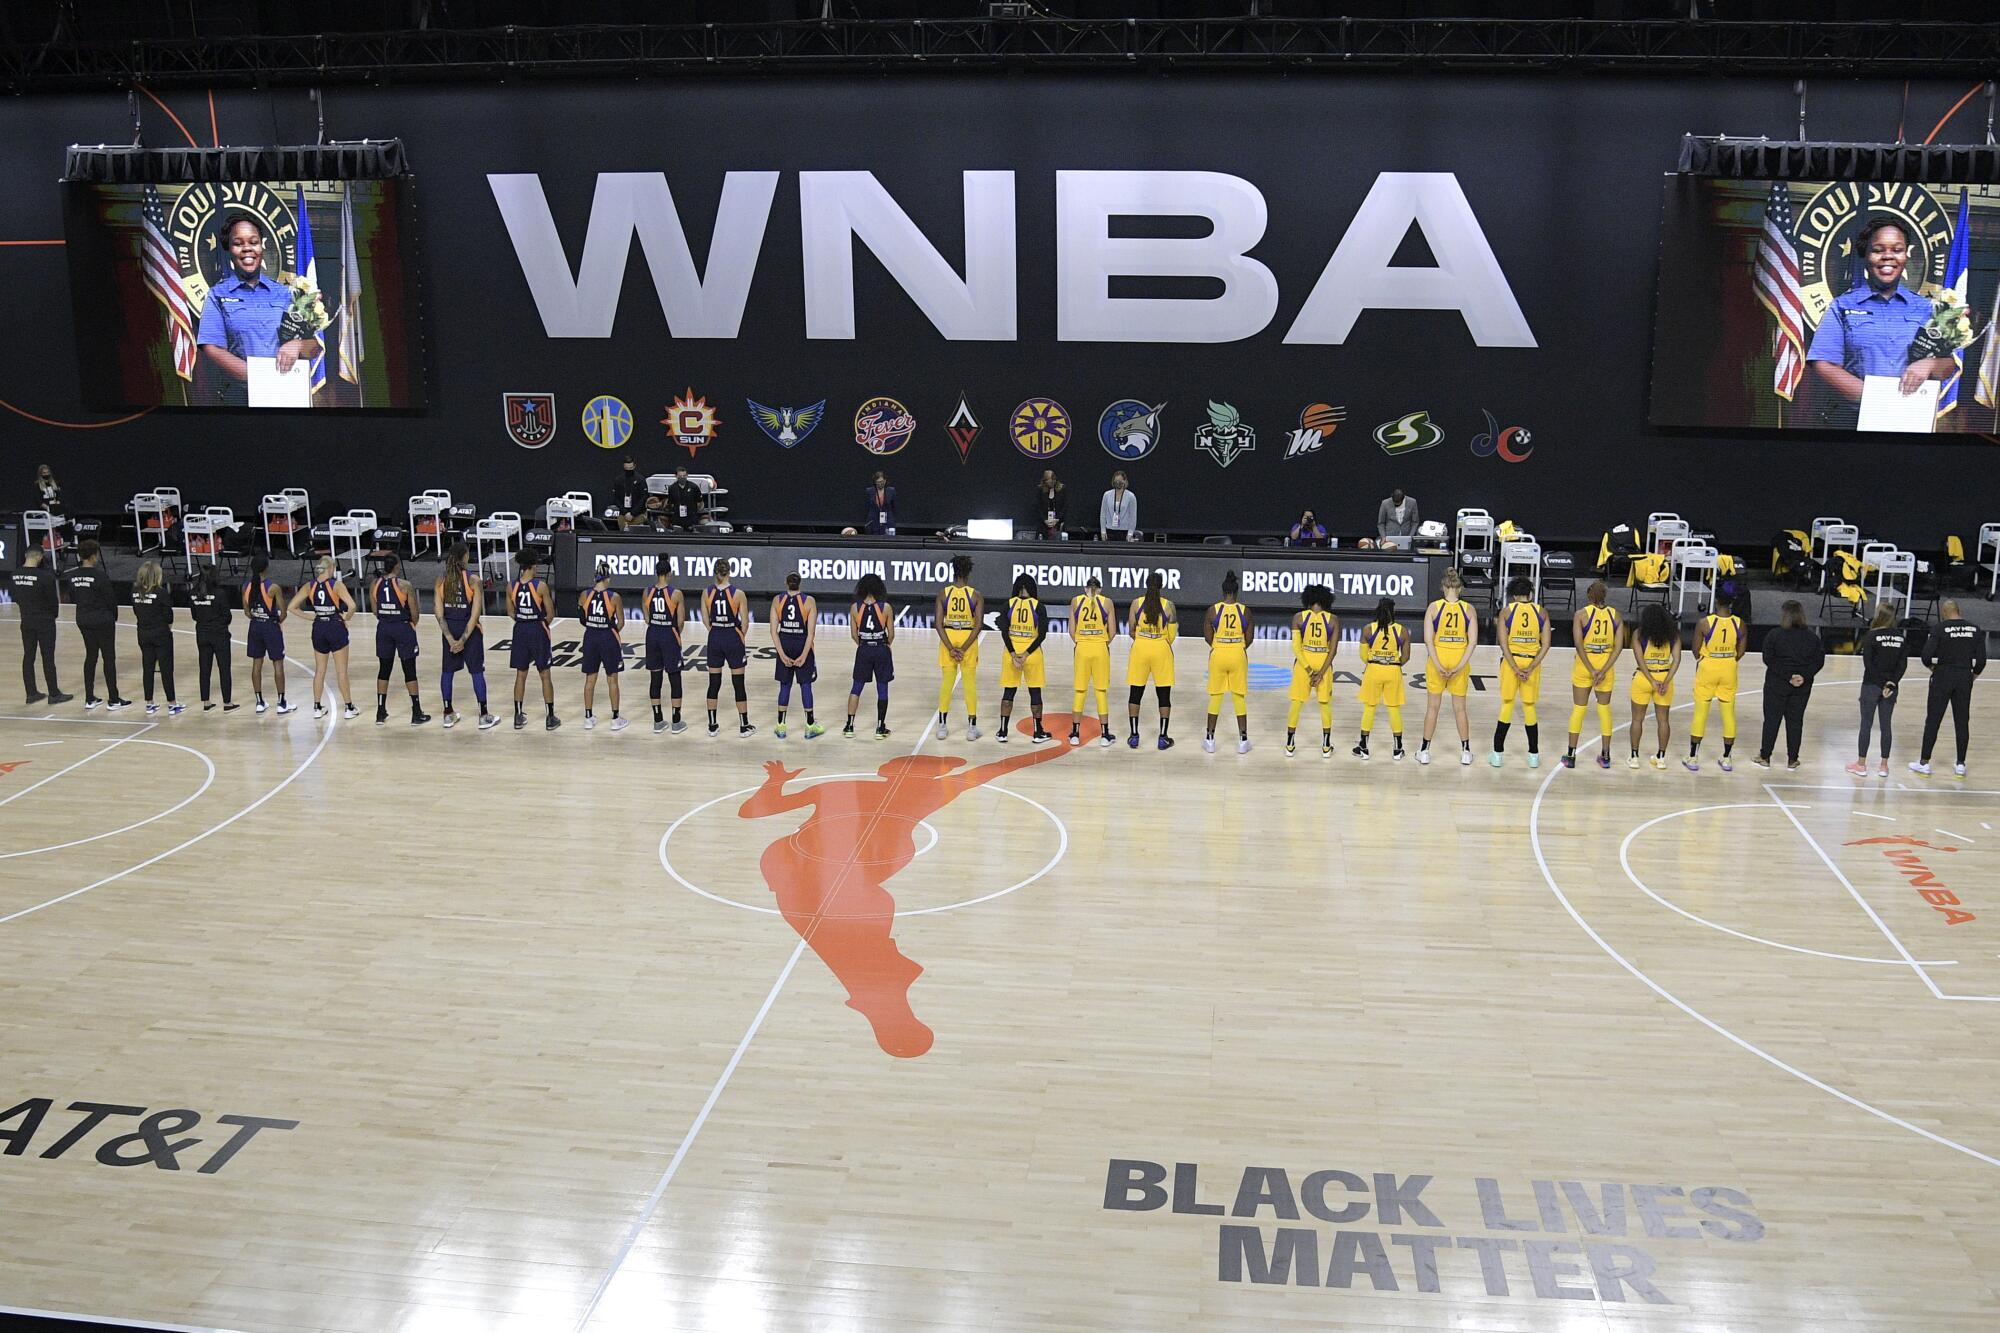 WNBA was clear leader in effecting social change in 2020 - Los Angeles Times